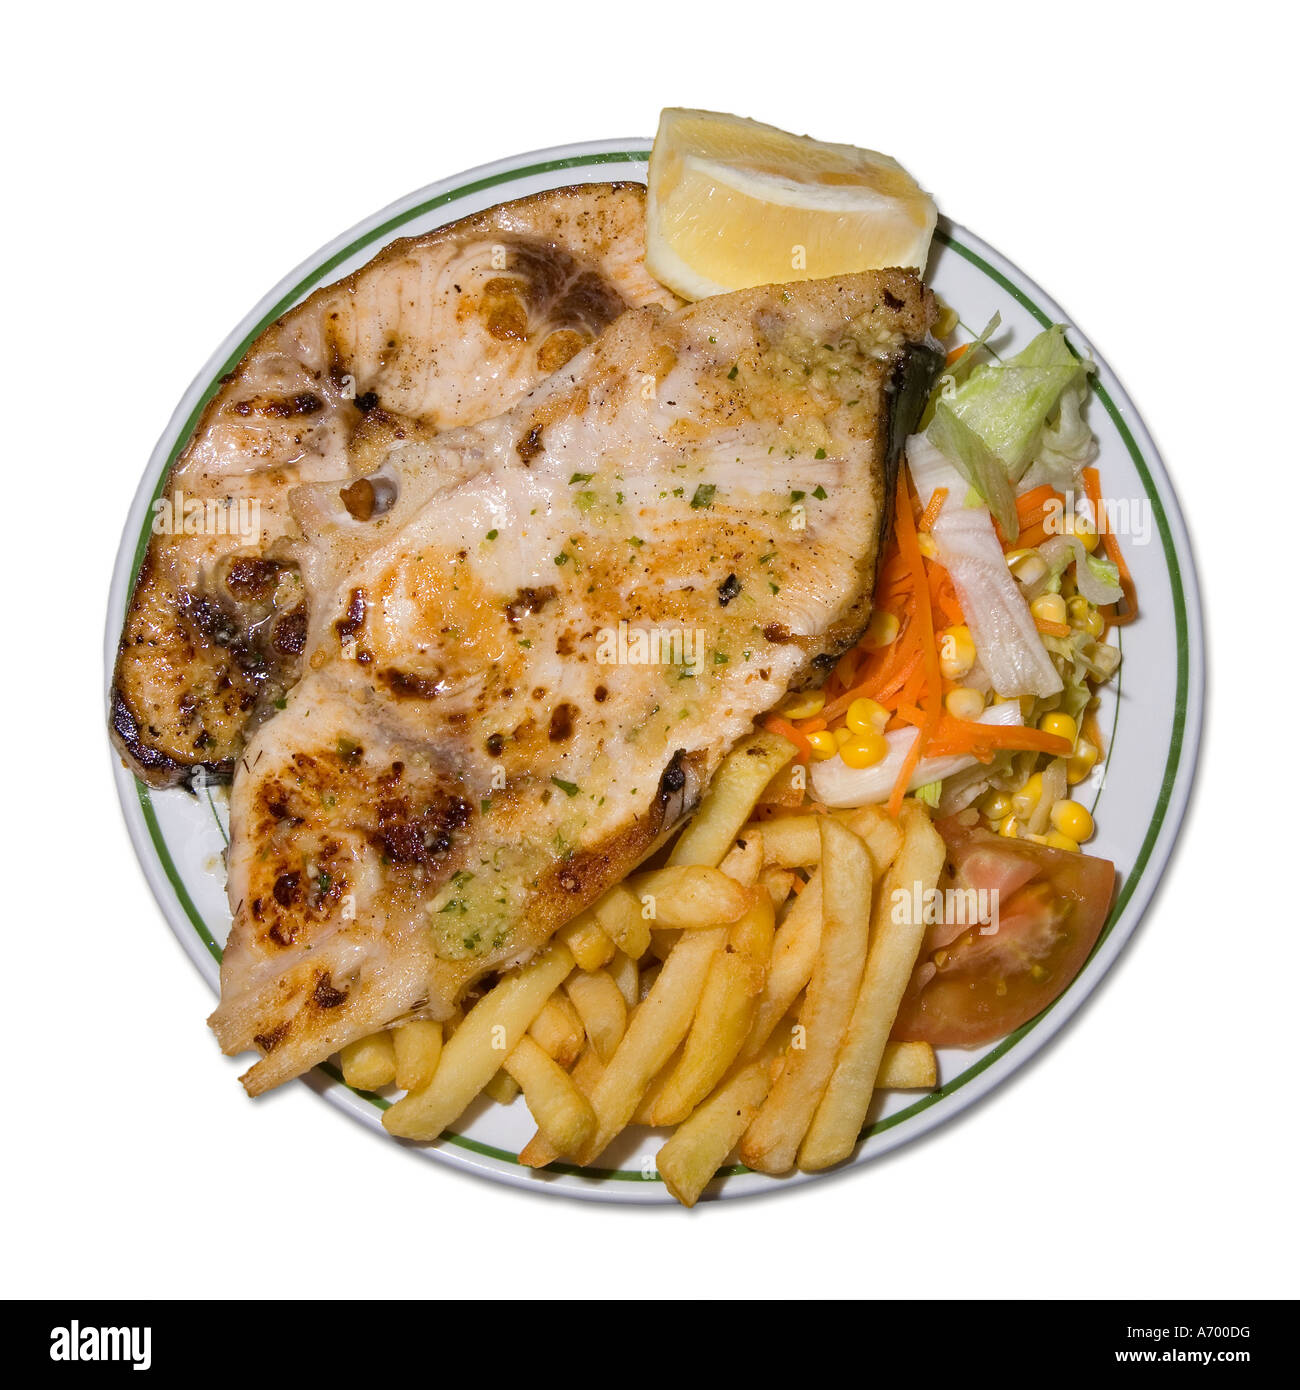 Grilled swordfish steak with chips and salad on white background Spain Stock Photo